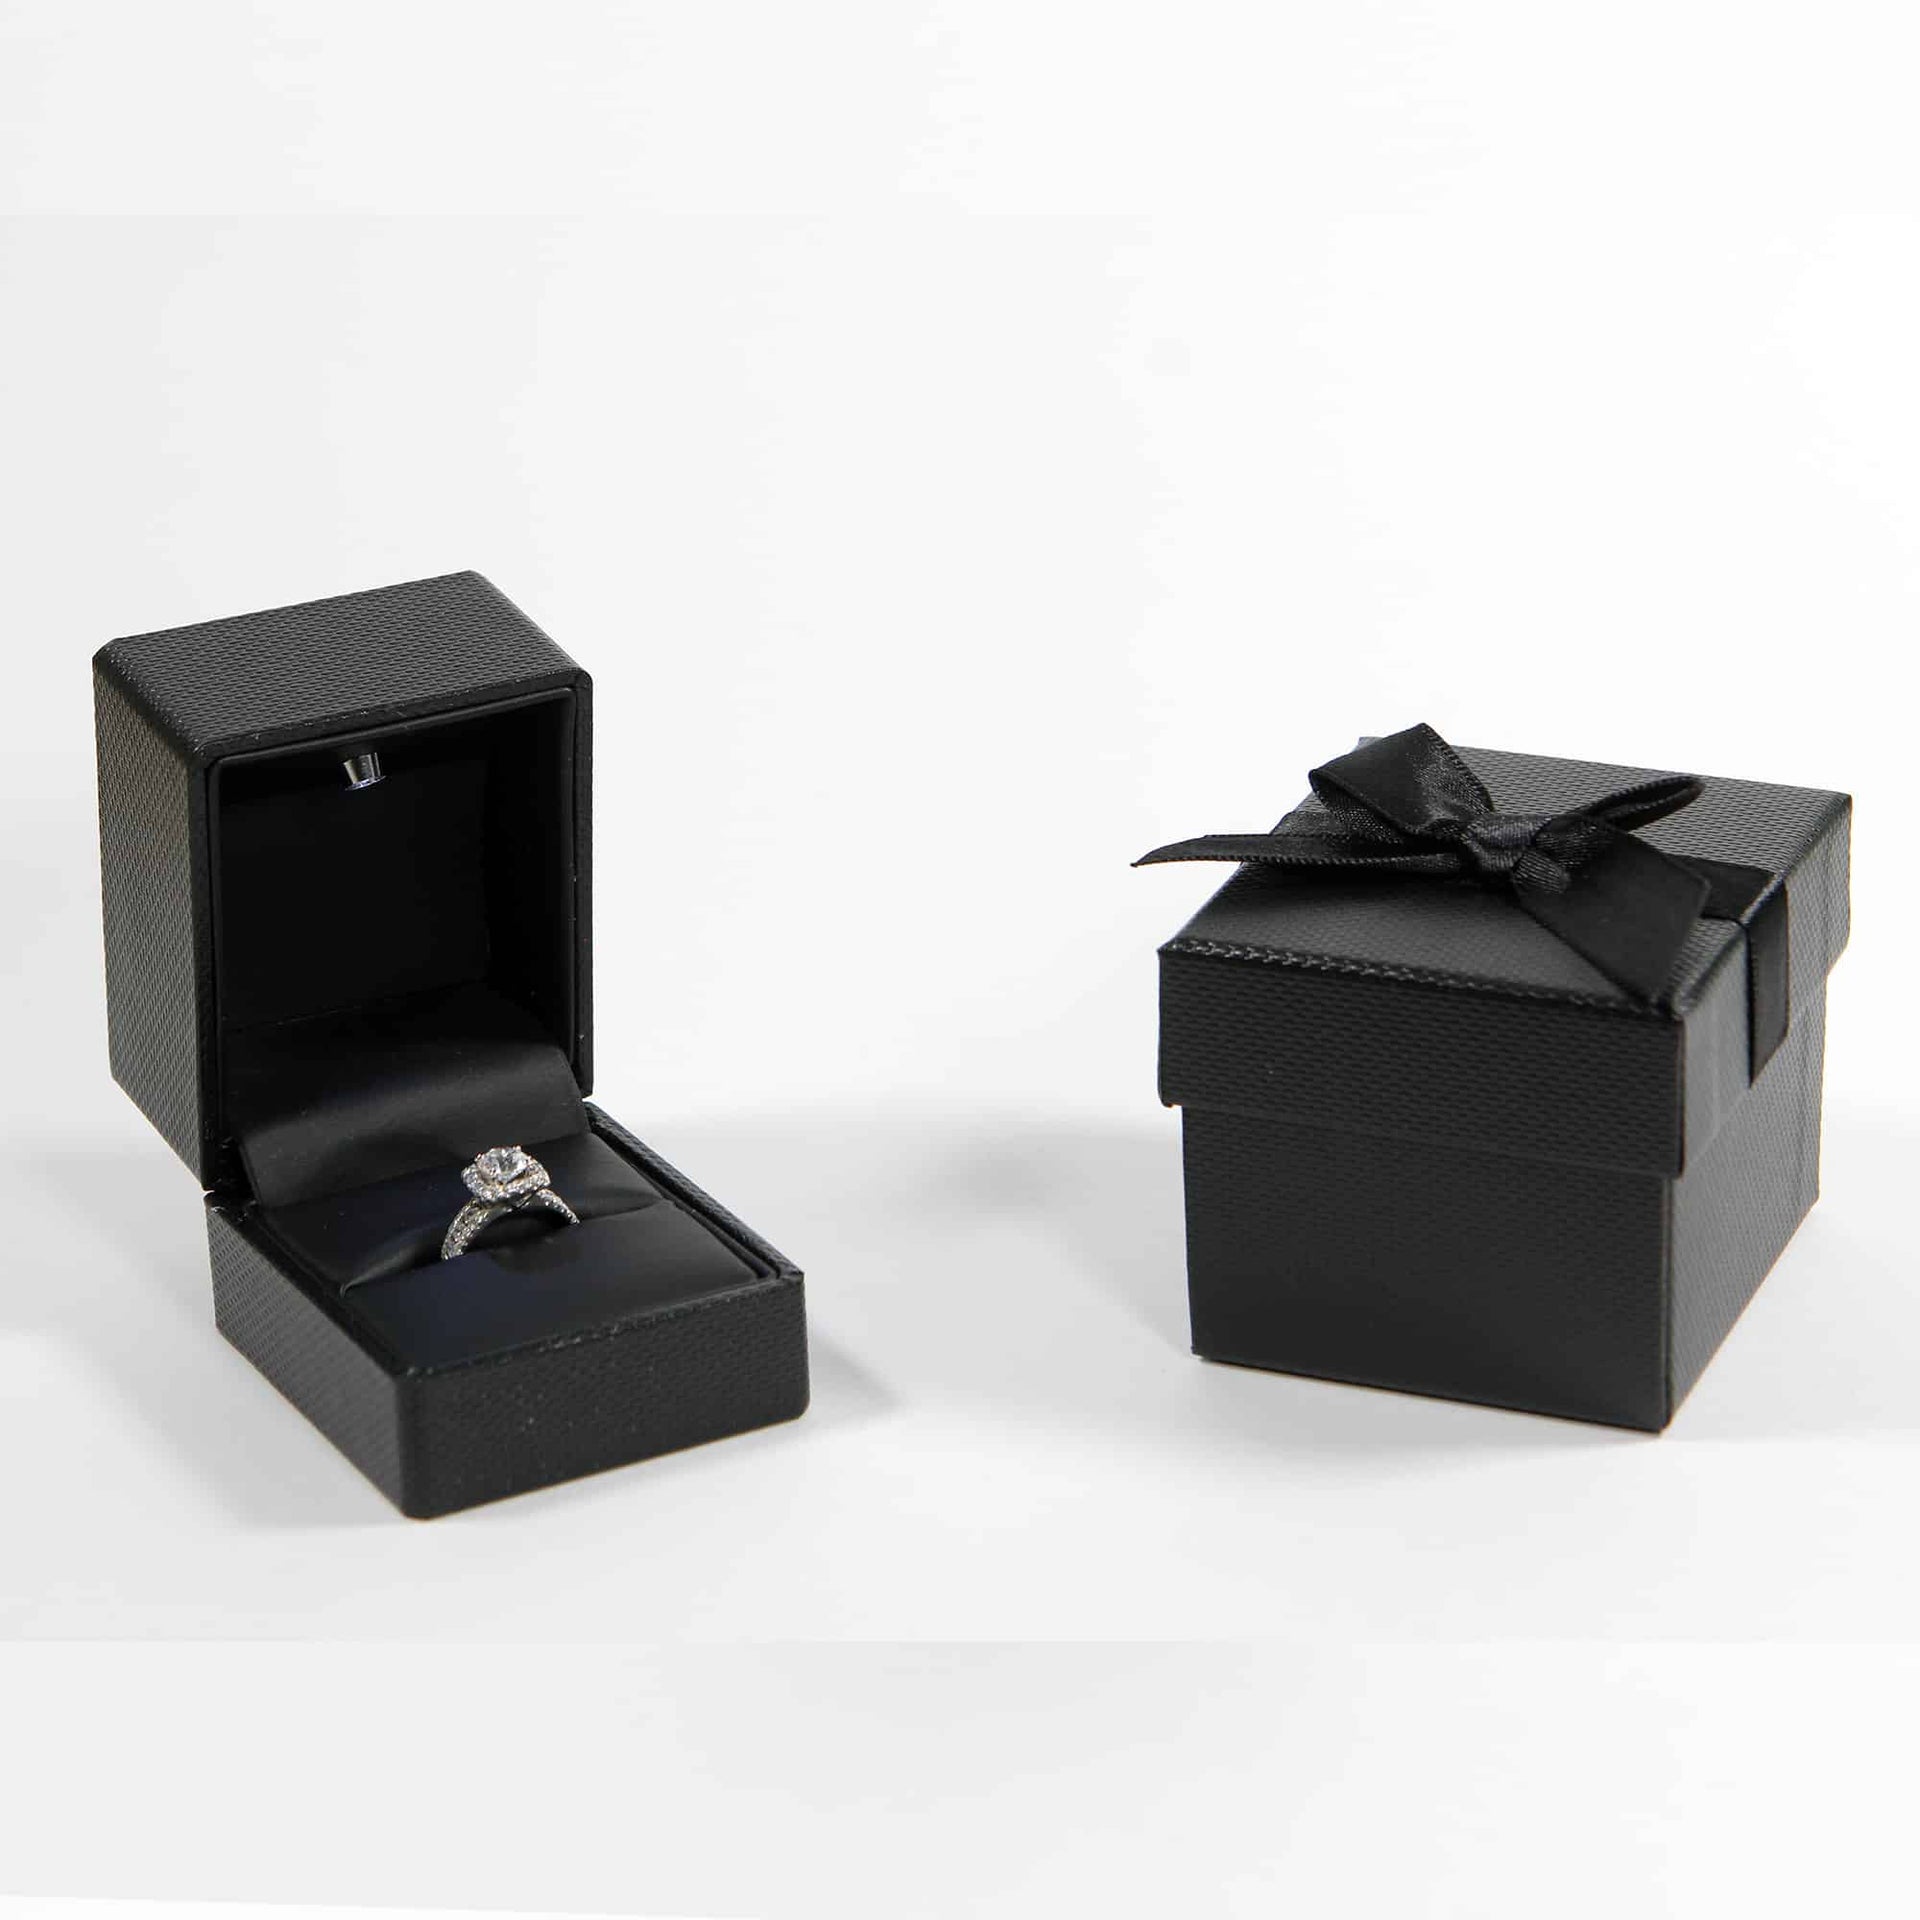 This is a modern black  ring box that has a built in led light pointed down at the ring. Great for weddings, proposals, ,engagements or just to show off your gems! Comes gift ready with a gift box.. .